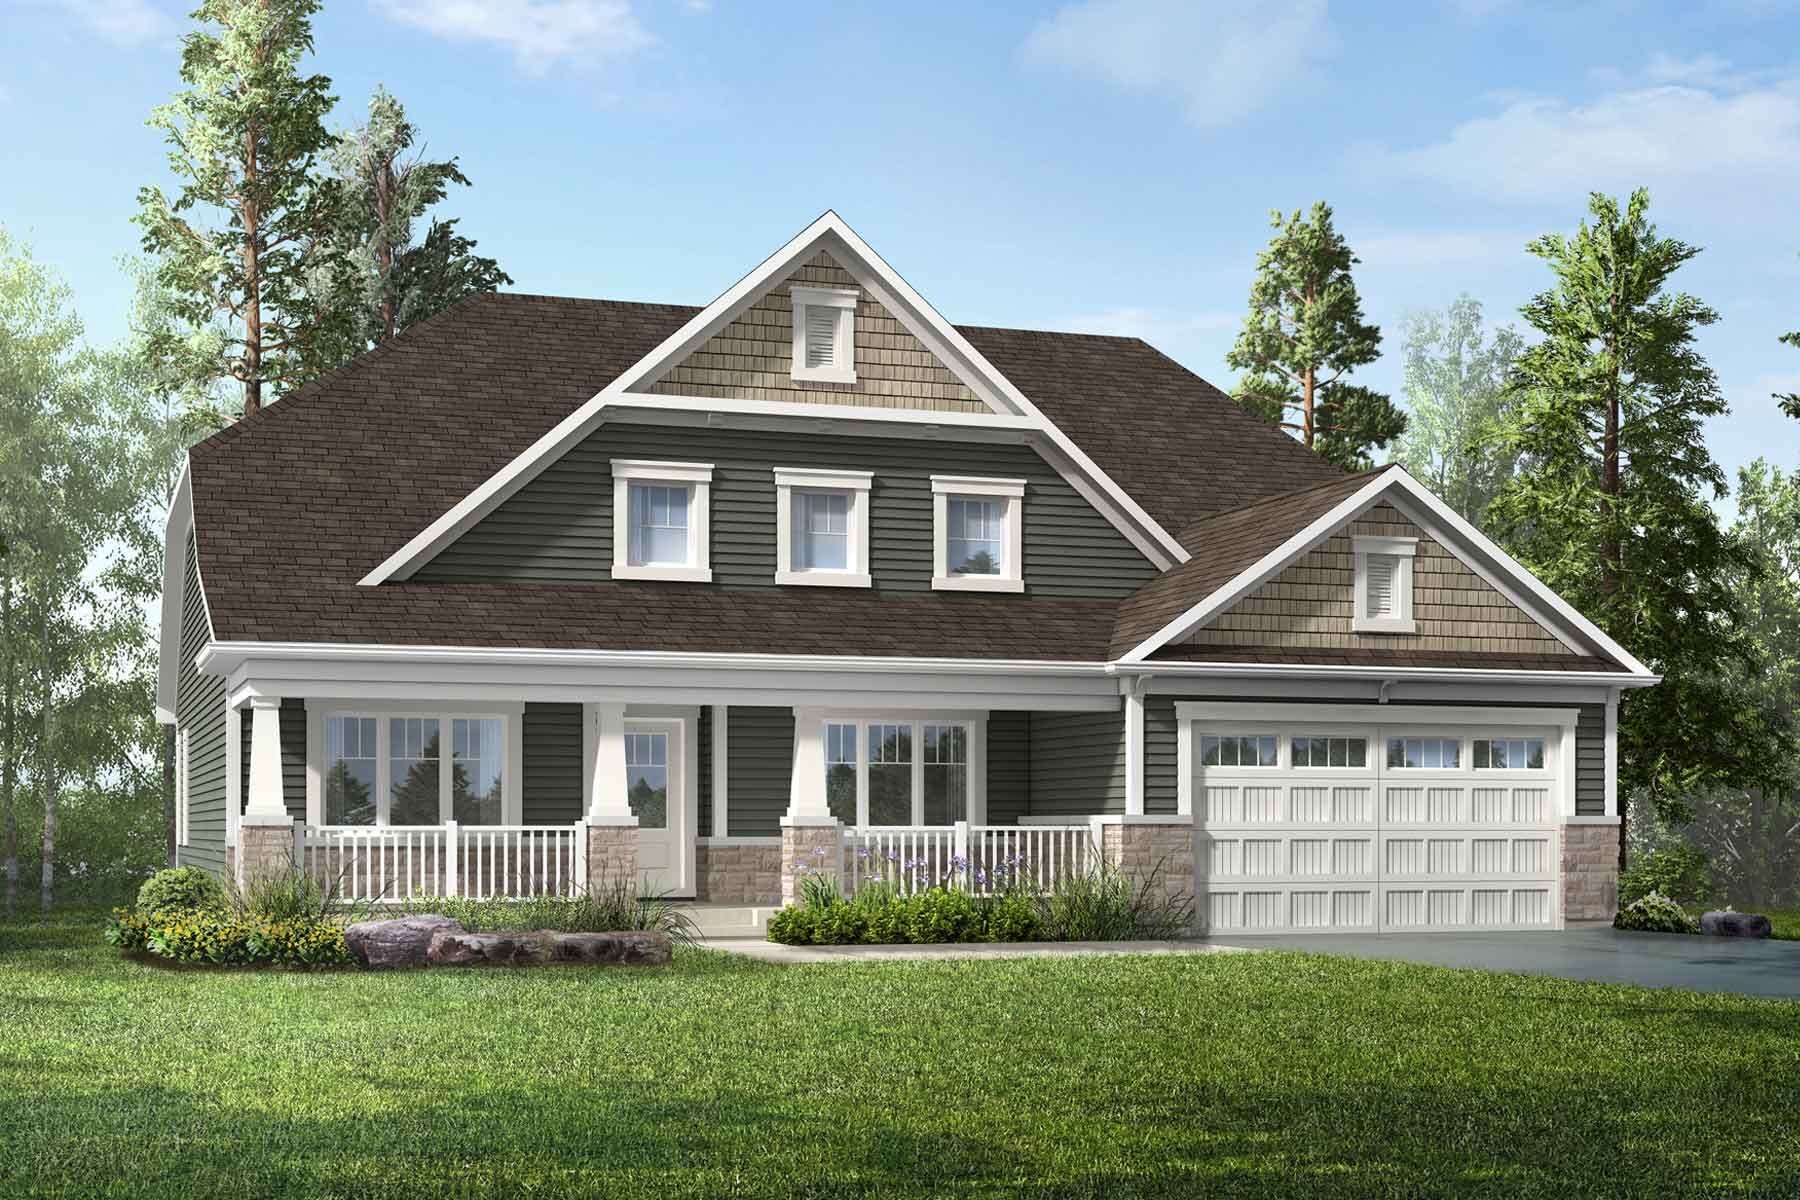 A craftsman elevation with a double car garage and a long, covered porch with pillars. 